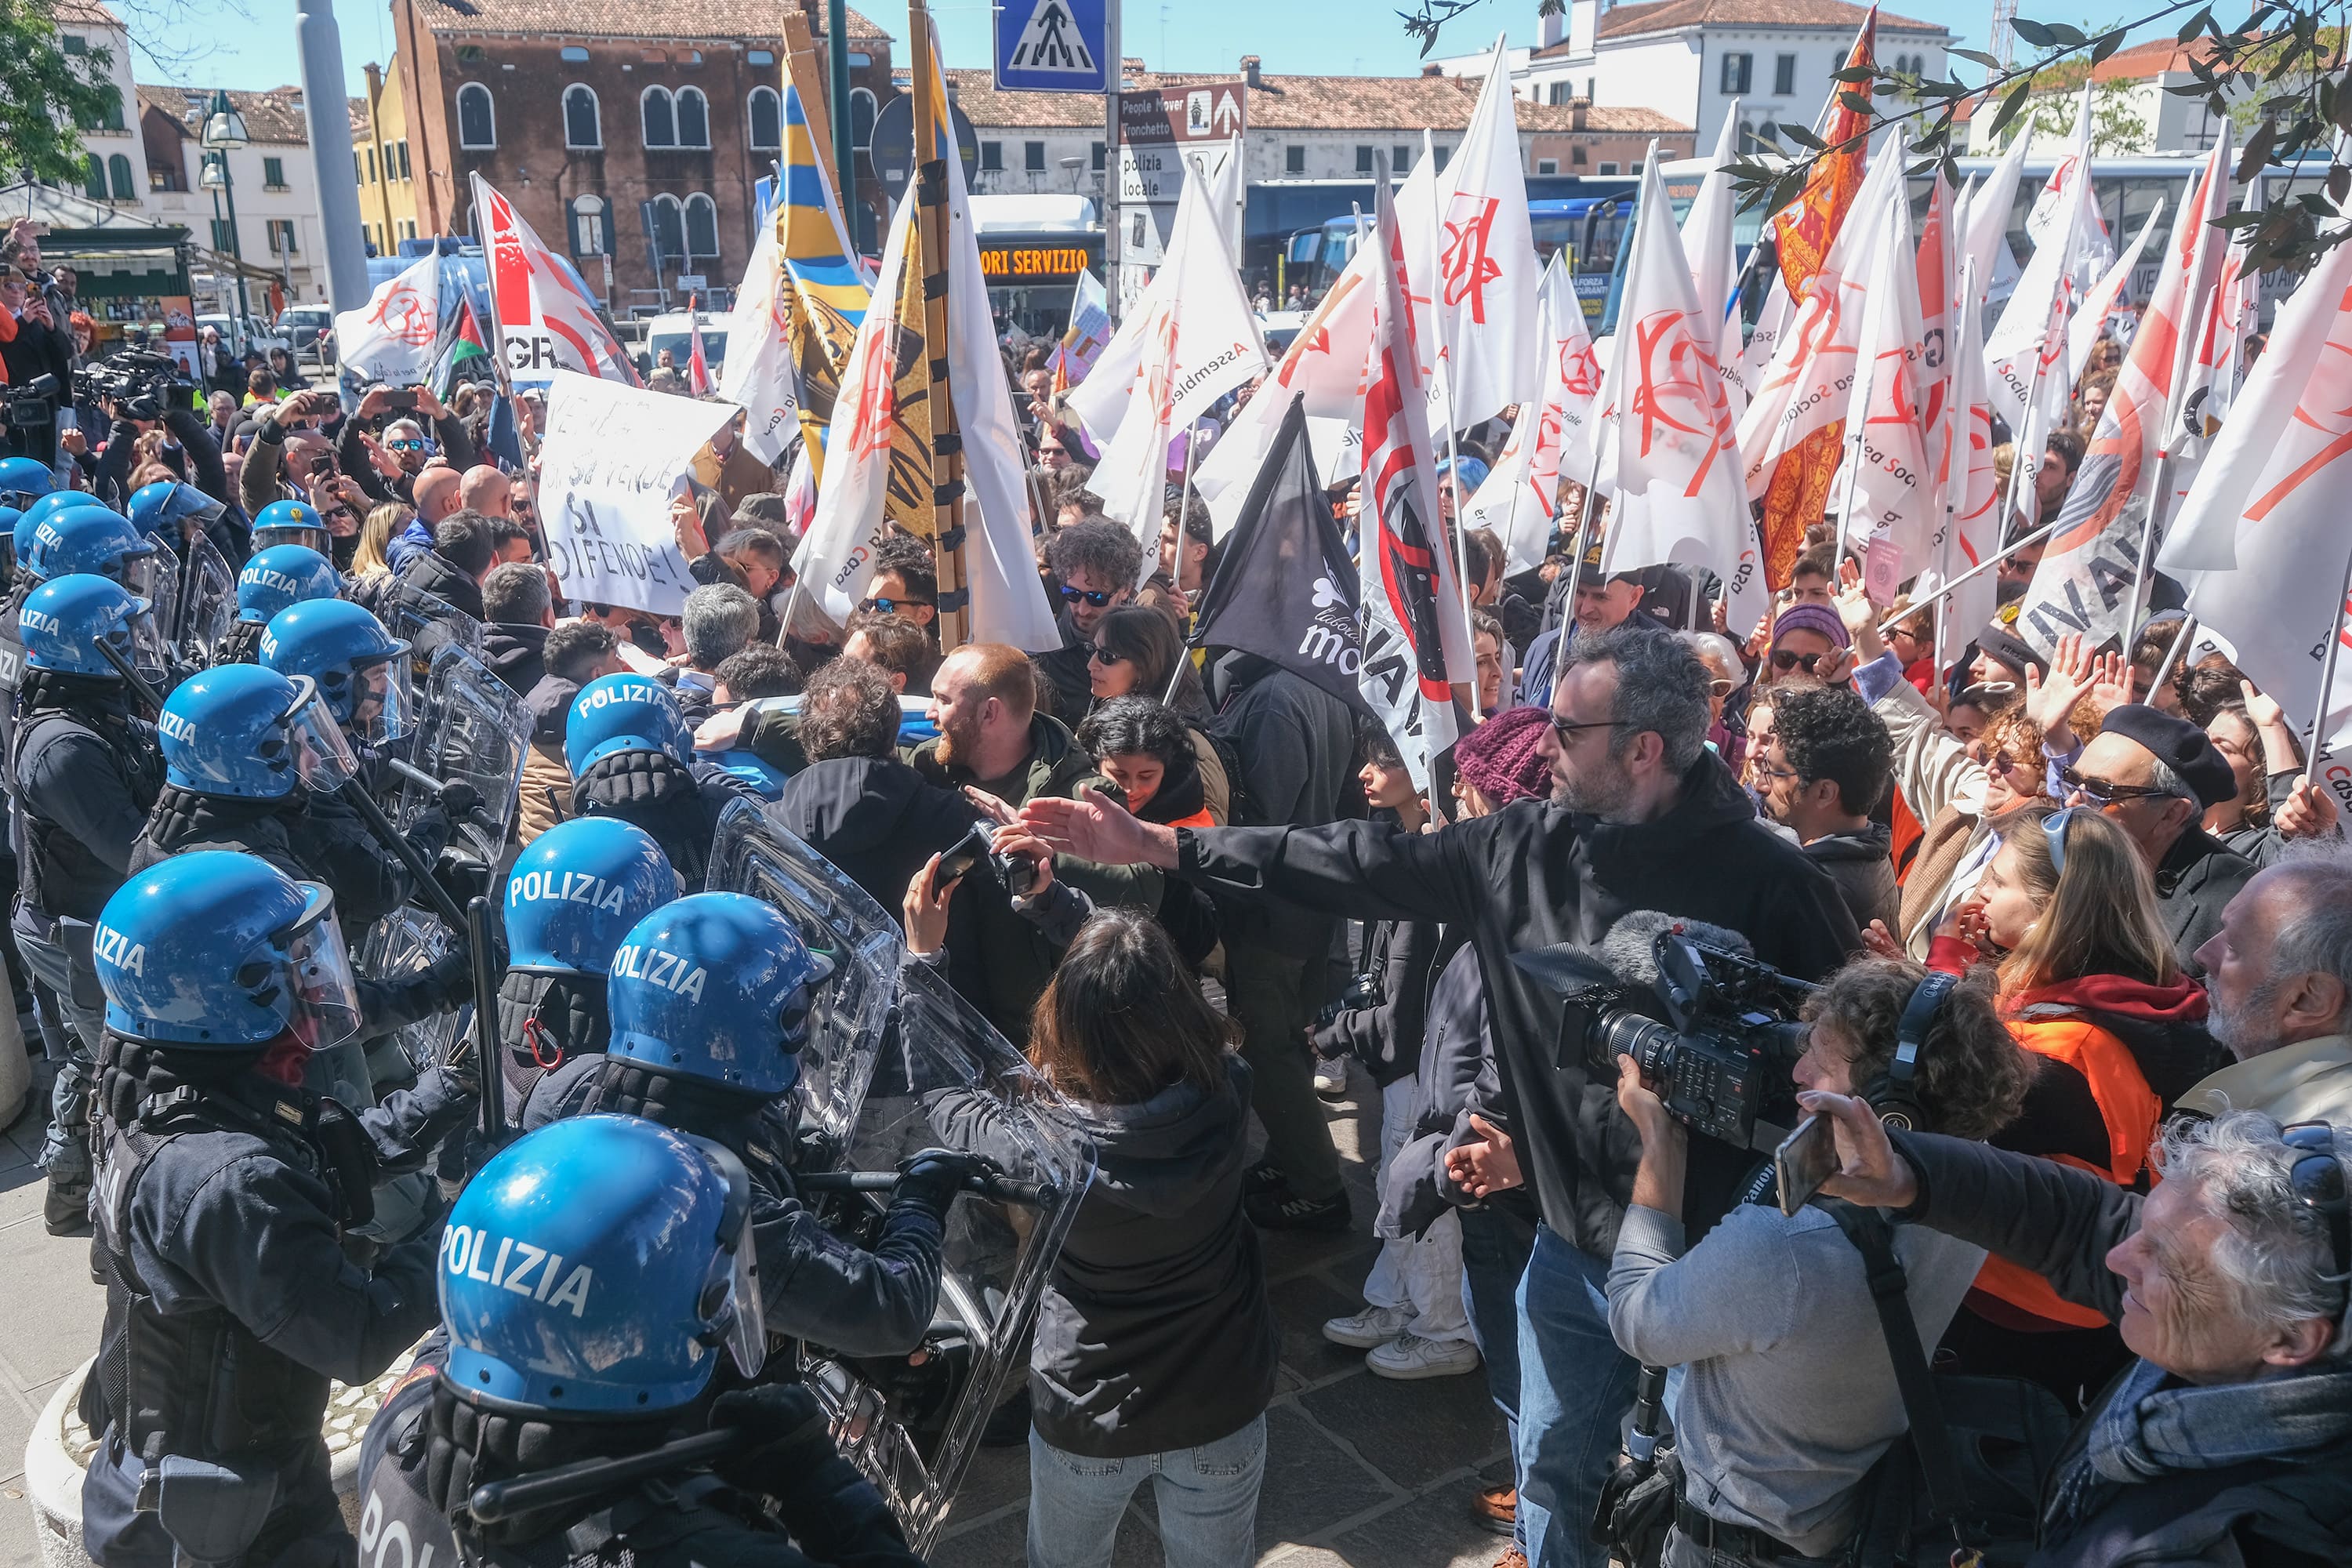 Venice residents clash with riot police as city launches world's first tourist entry fee